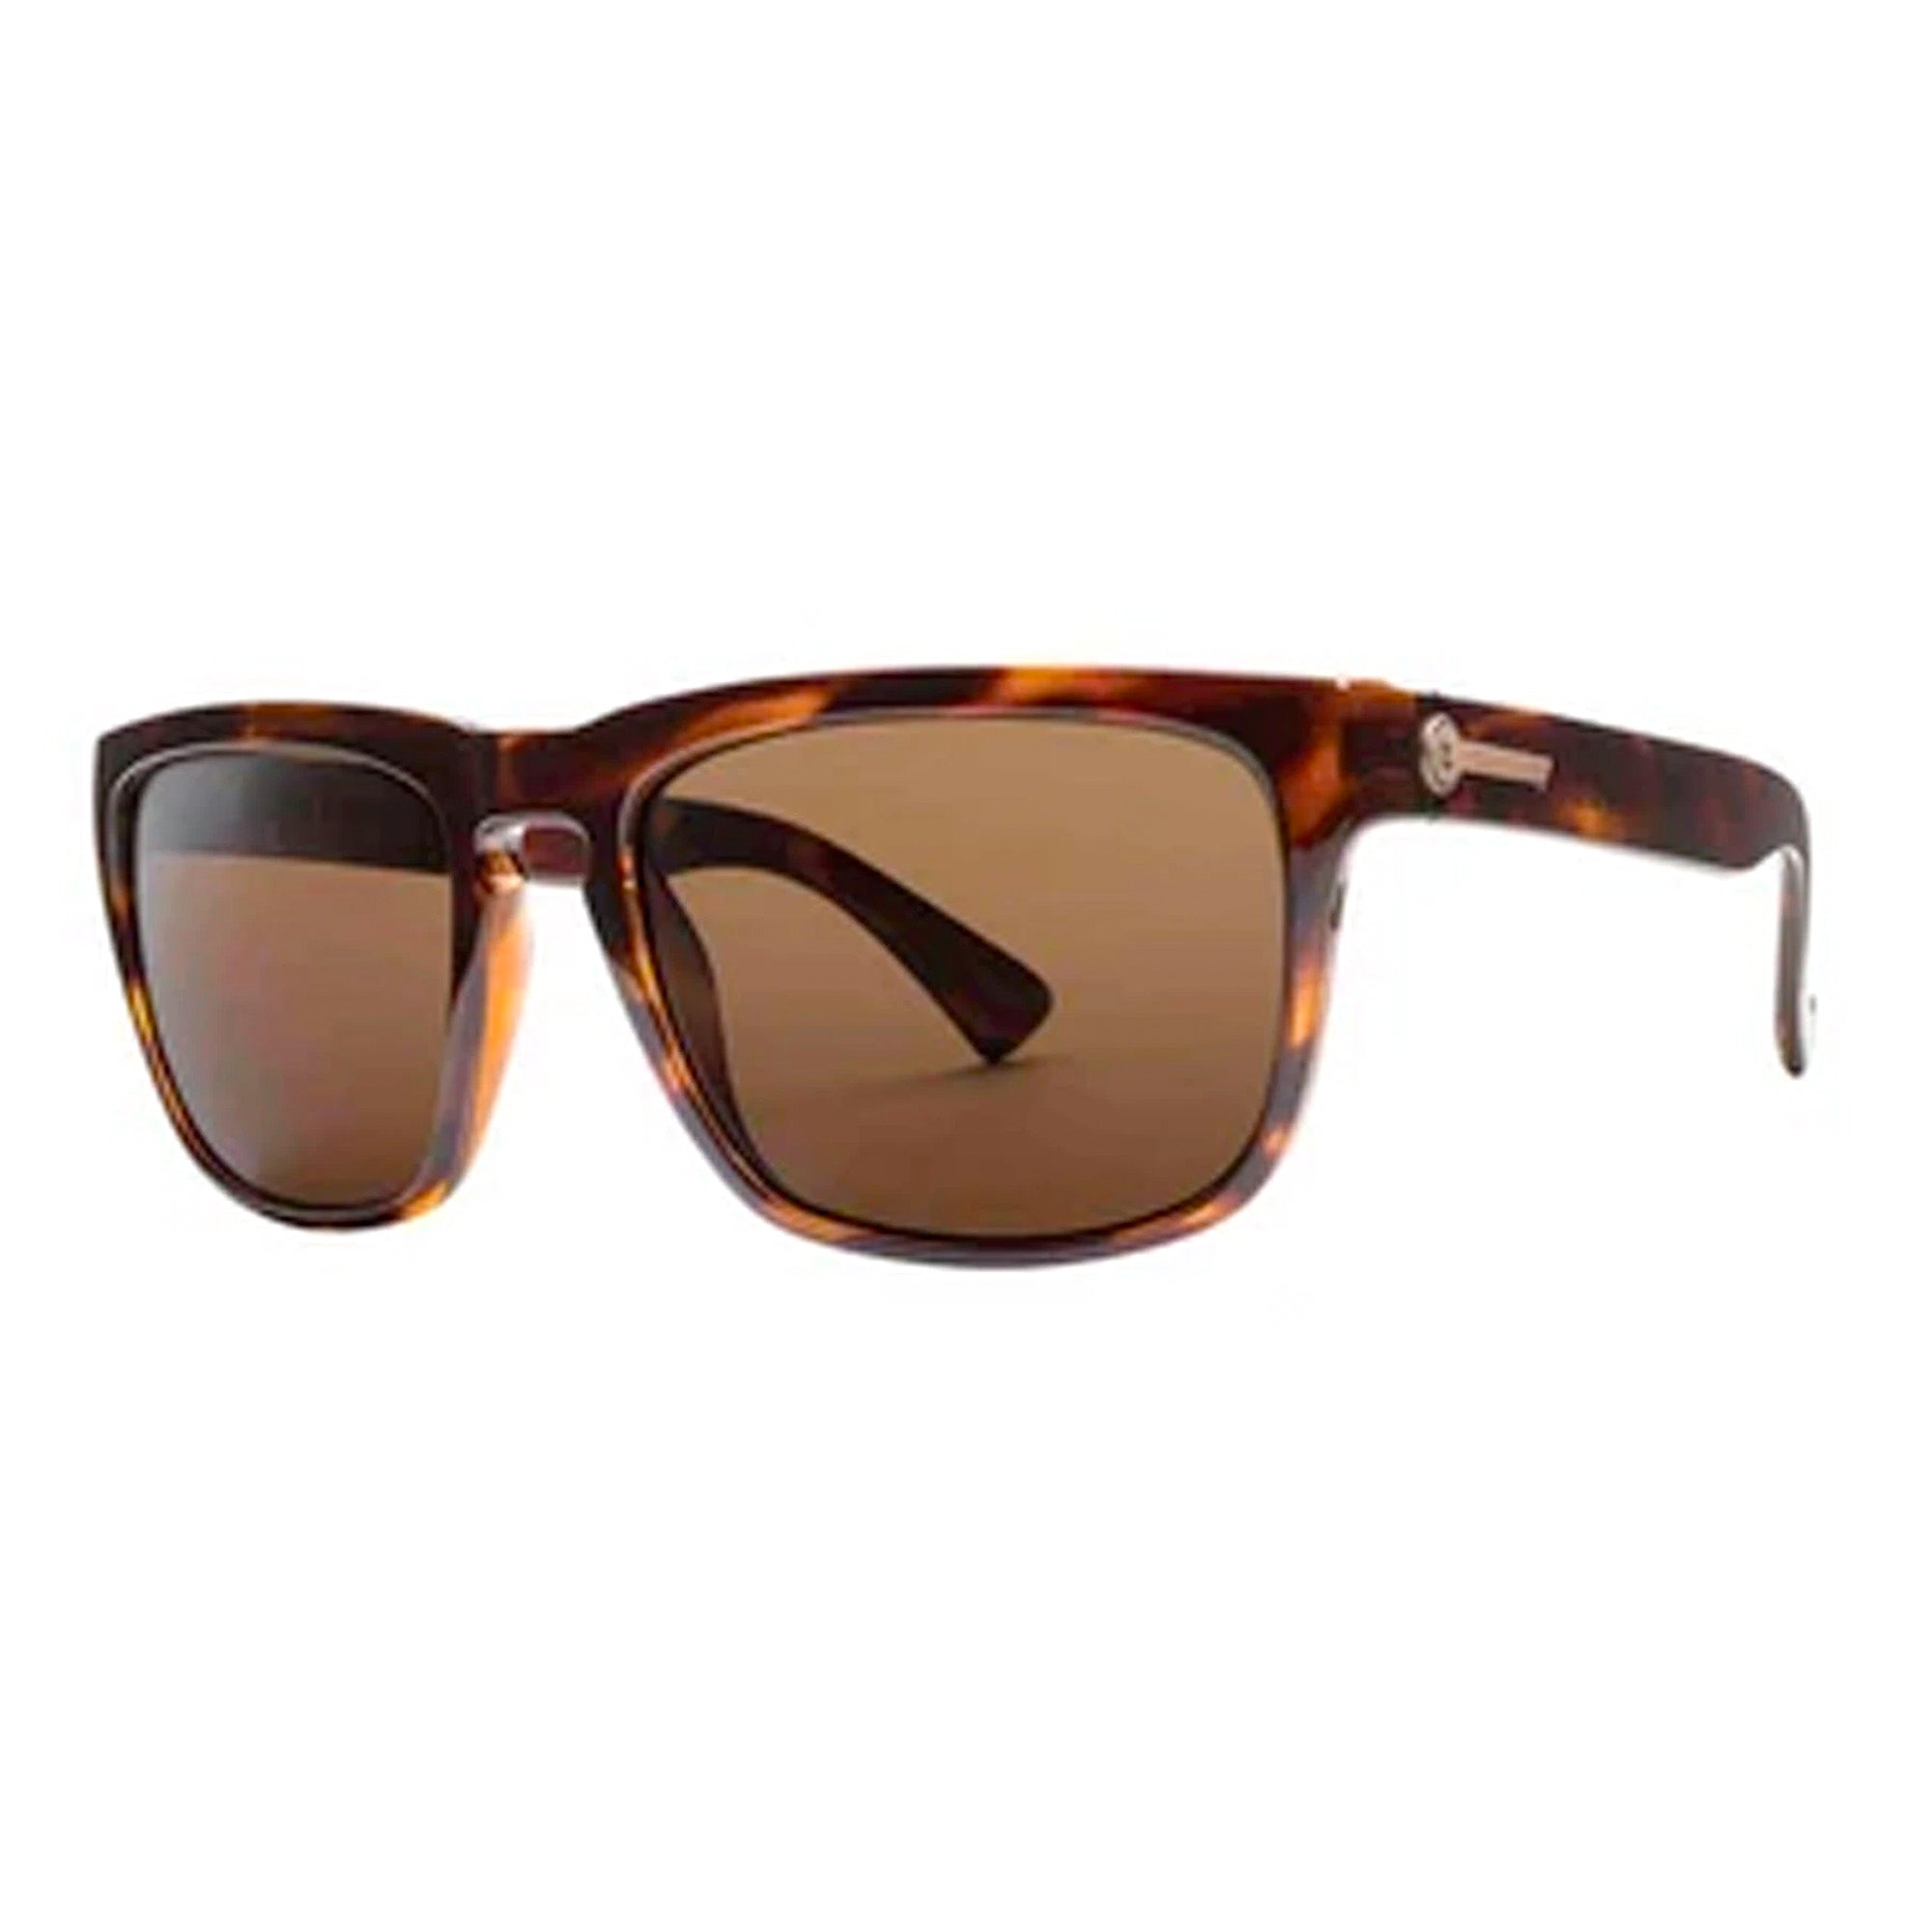 Electric Knoxville Men's Polarized Sunglasses